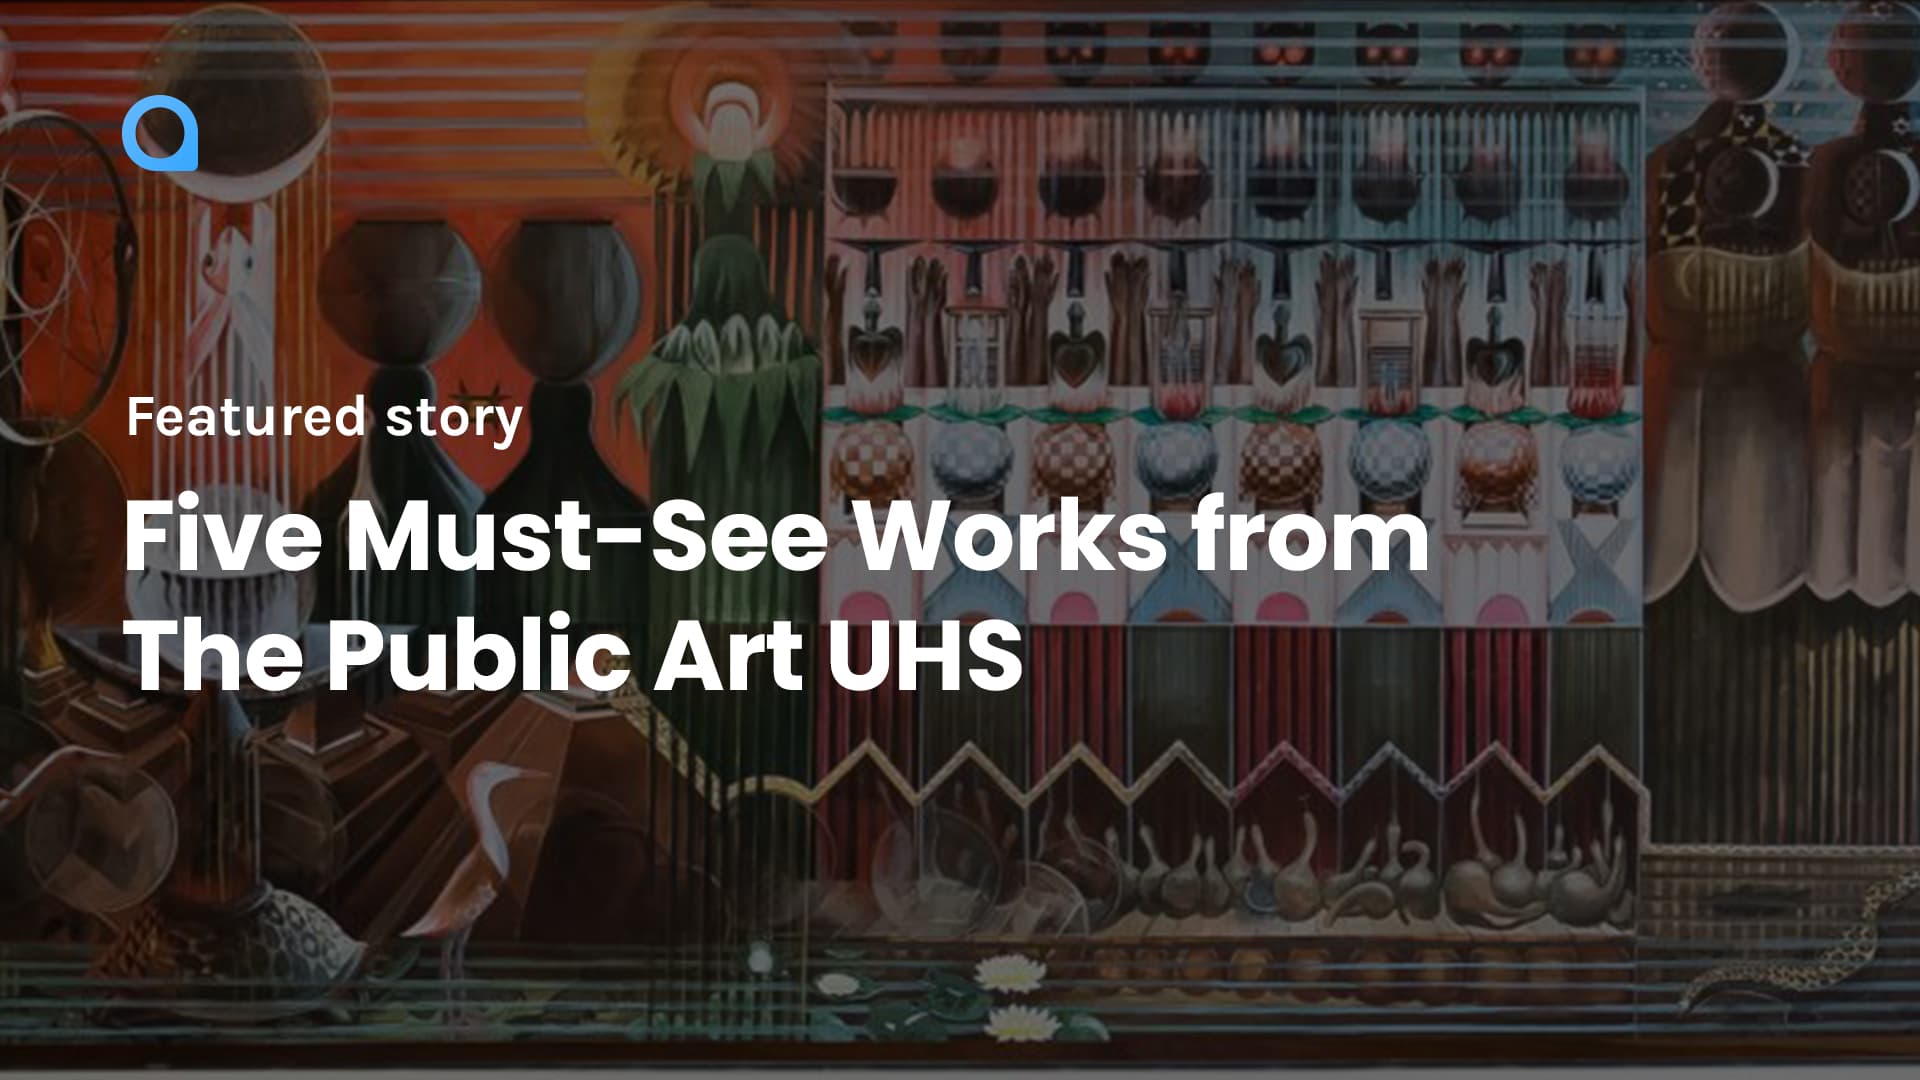 Five Must-See Works from The Public Art UHS